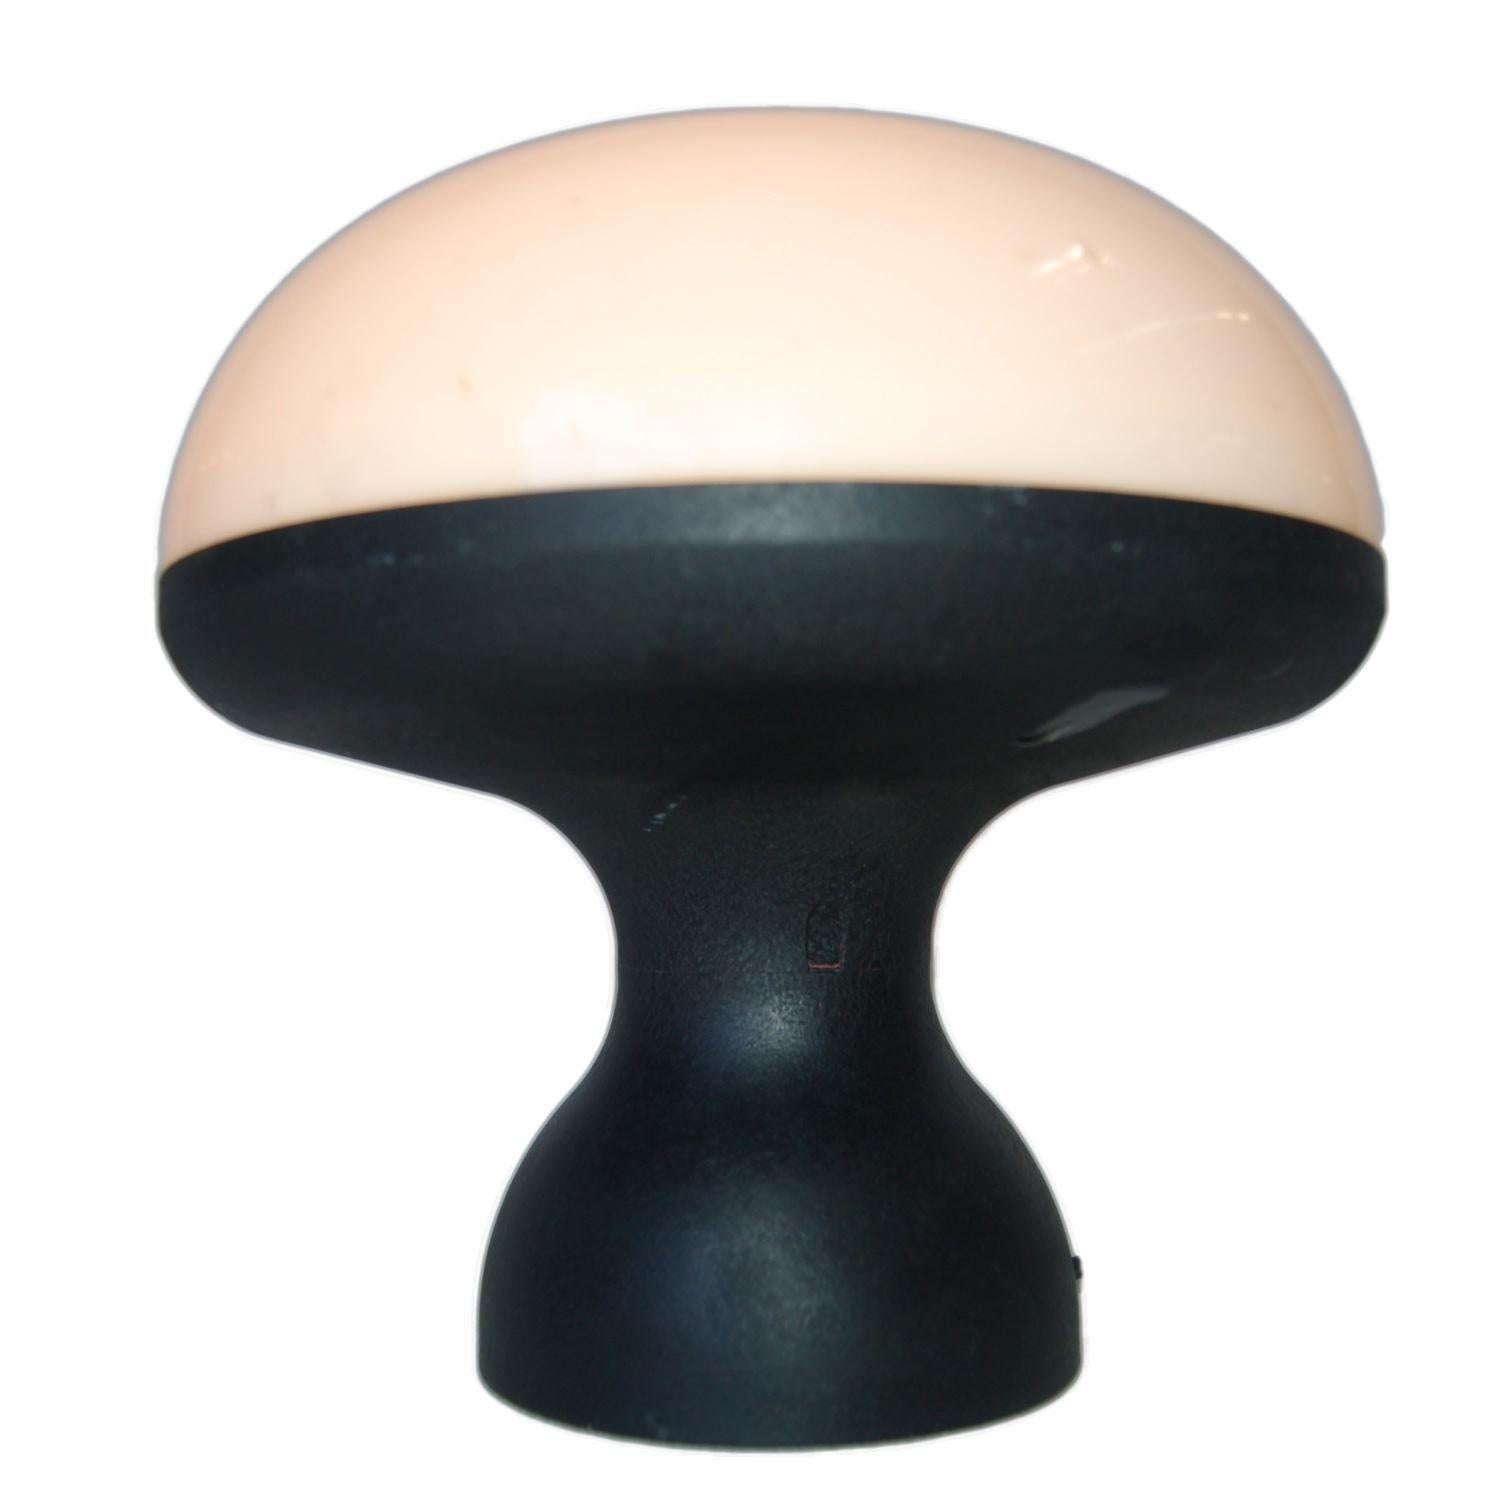 Postmodern Futurist Doom Mushroom Plastic Accent Table Lamp In Excellent Condition For Sale In Van Nuys, CA